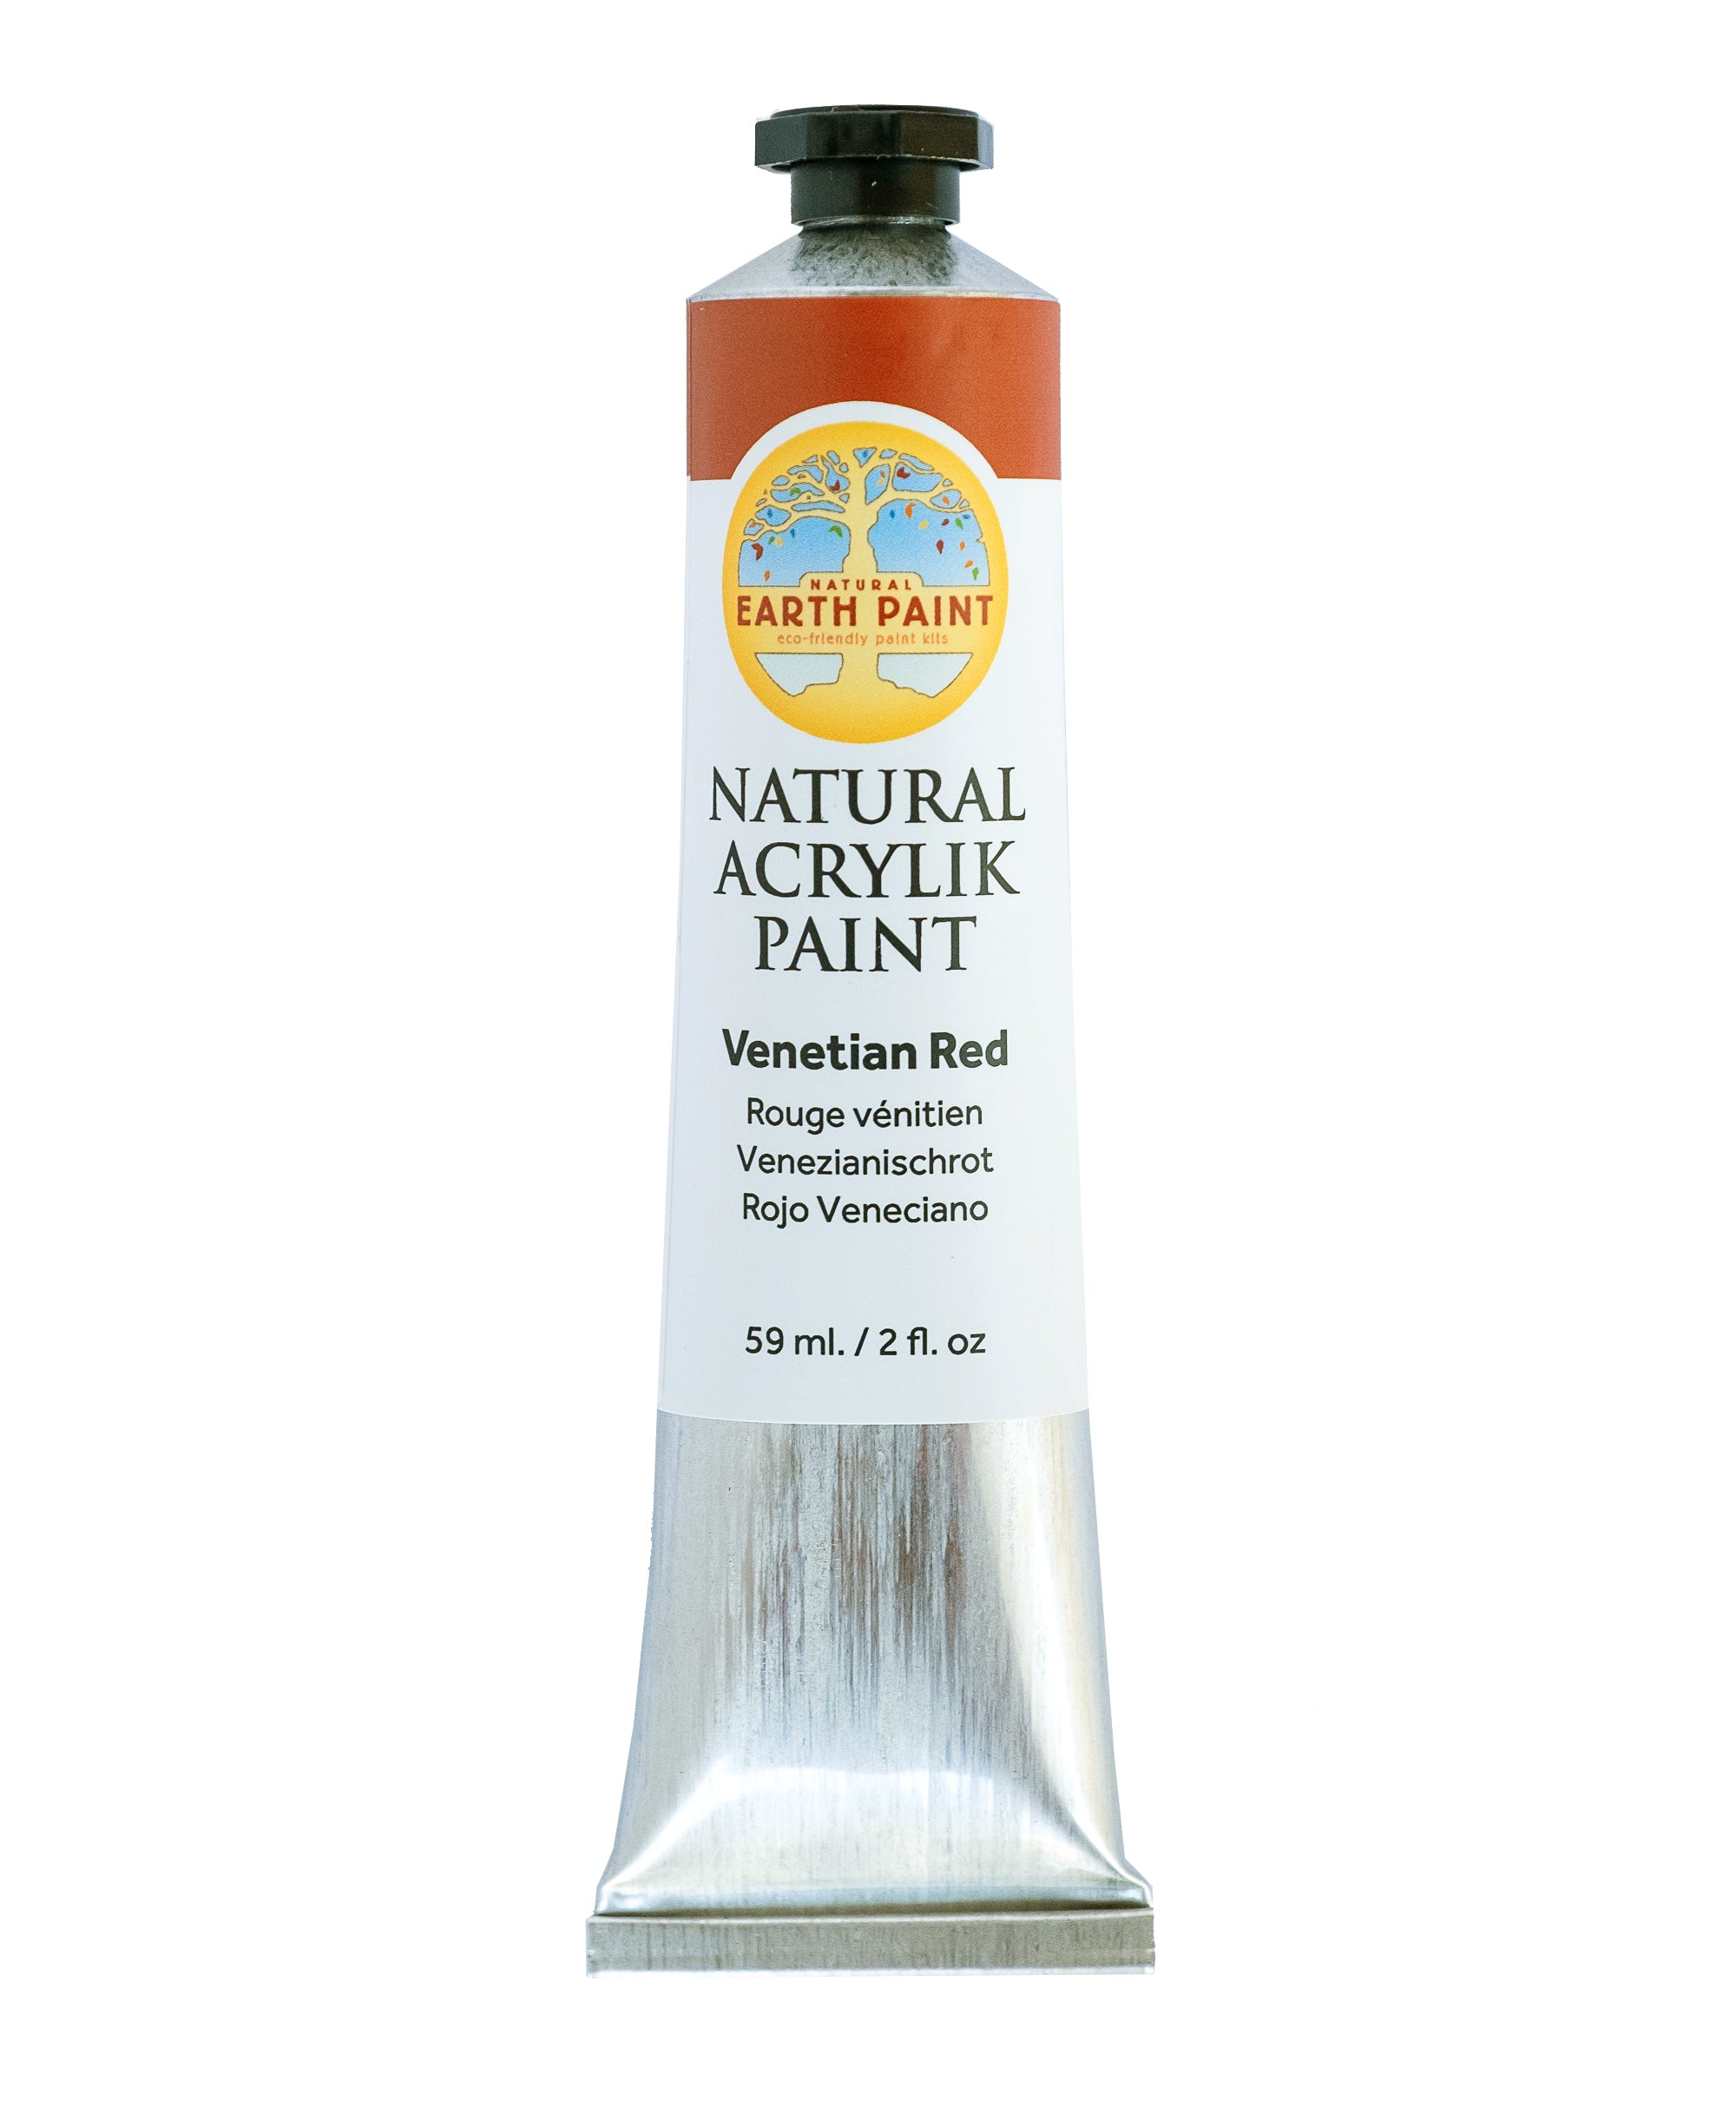 Natural Acrylik Paint™ - Individual Tubes-acrylic, acrylic paint, art, arts and craft, colors from the earth, earth colors, earth paint, earth pigments, eco art supplies, Eco Artist Paints, eco friendly paints, eco-friendly art supplies, eco-friendly paint, Fine Art Supplies Products, natural acrylic, natural artist paints, natural earth colors, natural paint, natural paints, non-toxic paint, nontoxic artist paints, nontoxic artist supplies, nontoxic paints, paint, sustainable art supplies-Venetian Red-Natu